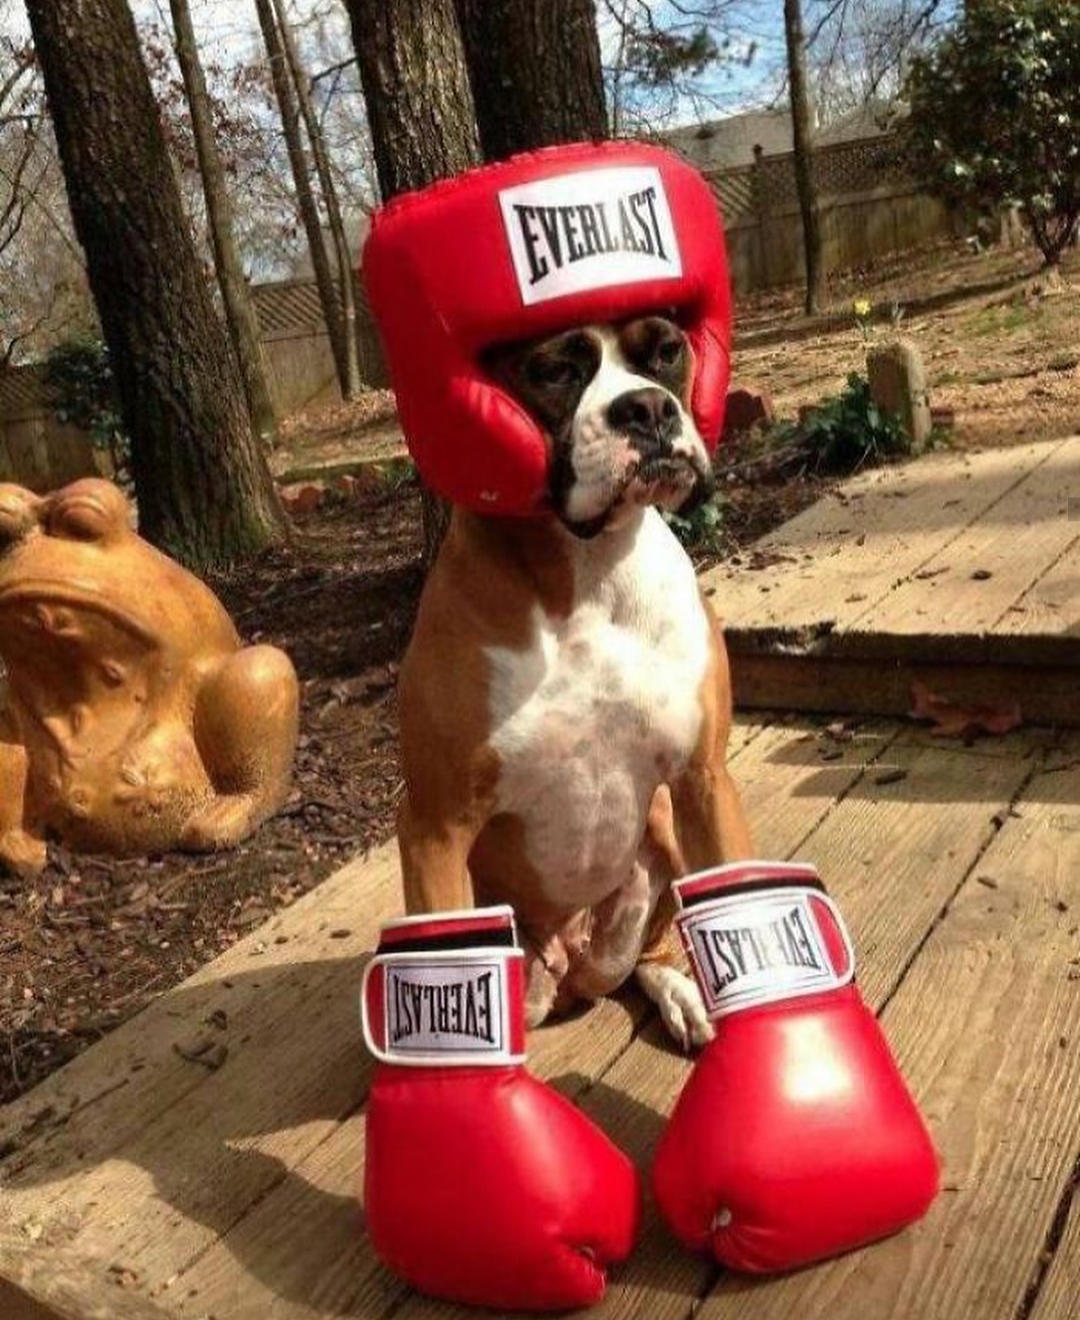 A Boxer sitting on the wooden pathway in its boxer costume